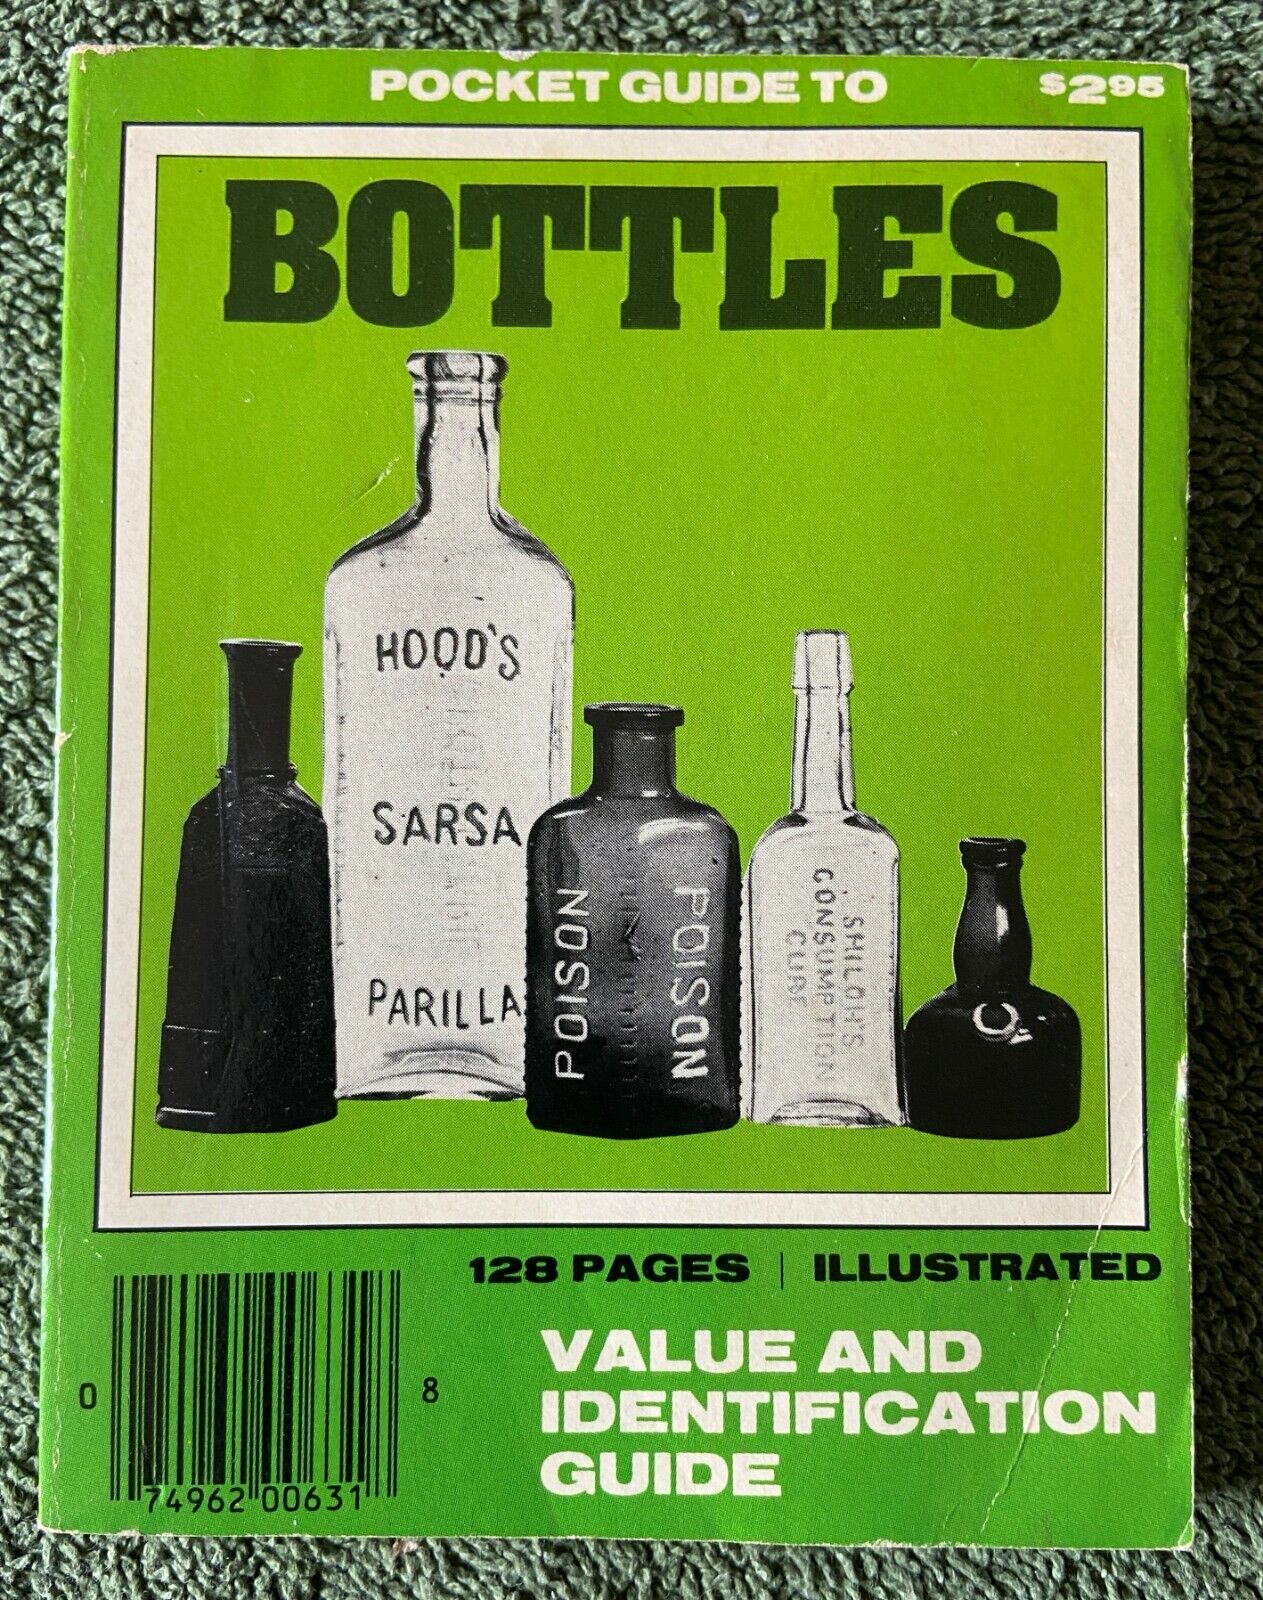 Pocket Guide To Bottles: Value And Identification Guide 1978 Illustrated